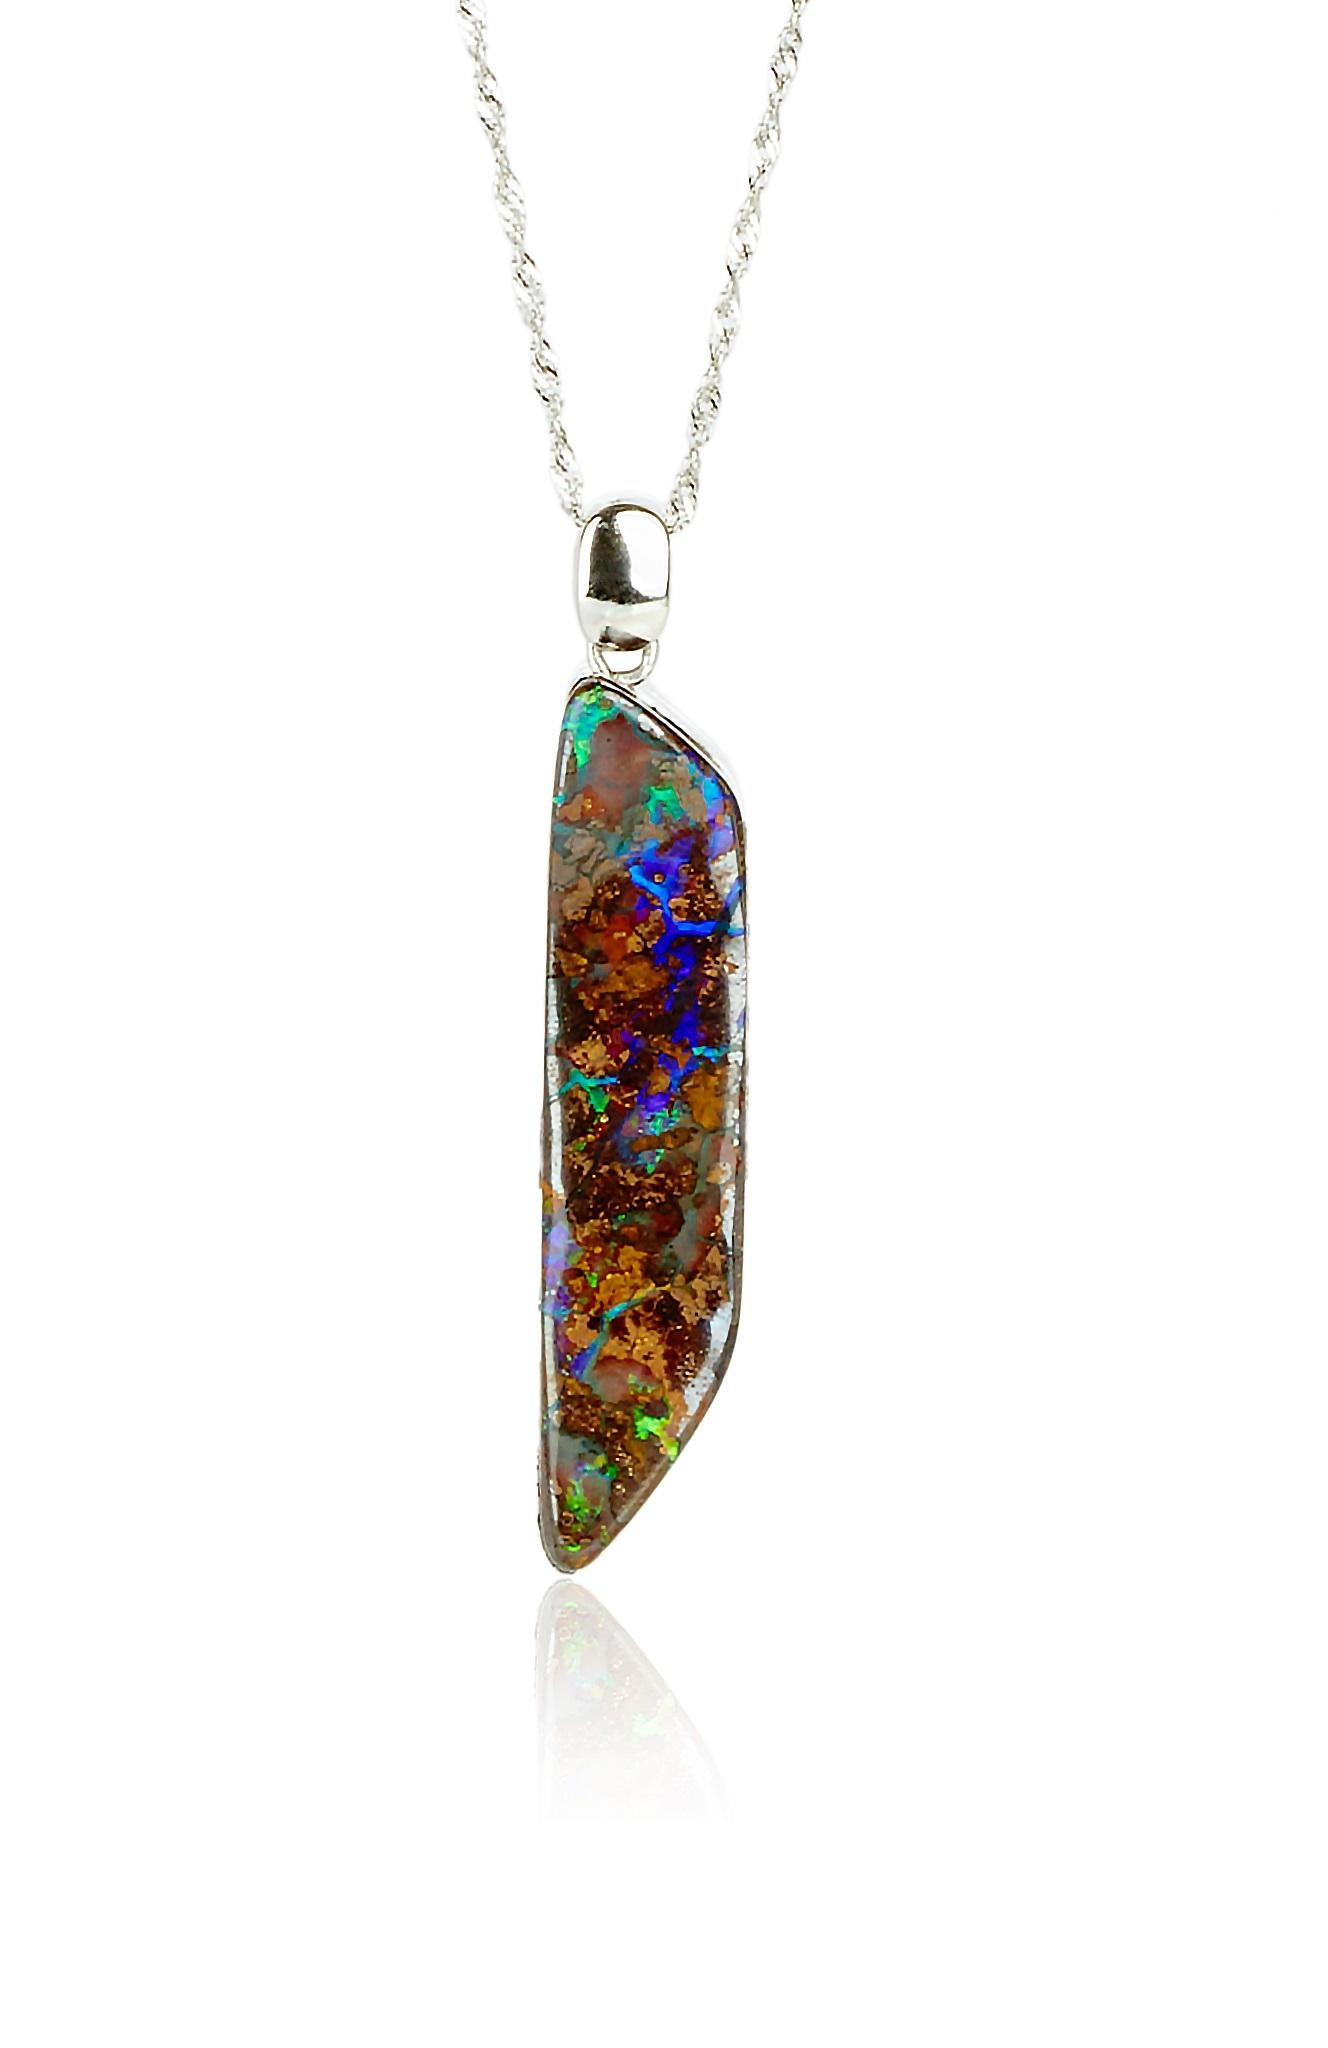 This one of a kind pendant is from Lingjun's earlier creation, featuring a hand-carved boulder opal from Queensland, Australia, accent with diamonds, showcasing the gem's beauty from different perspectives on either side. 

This natural solid